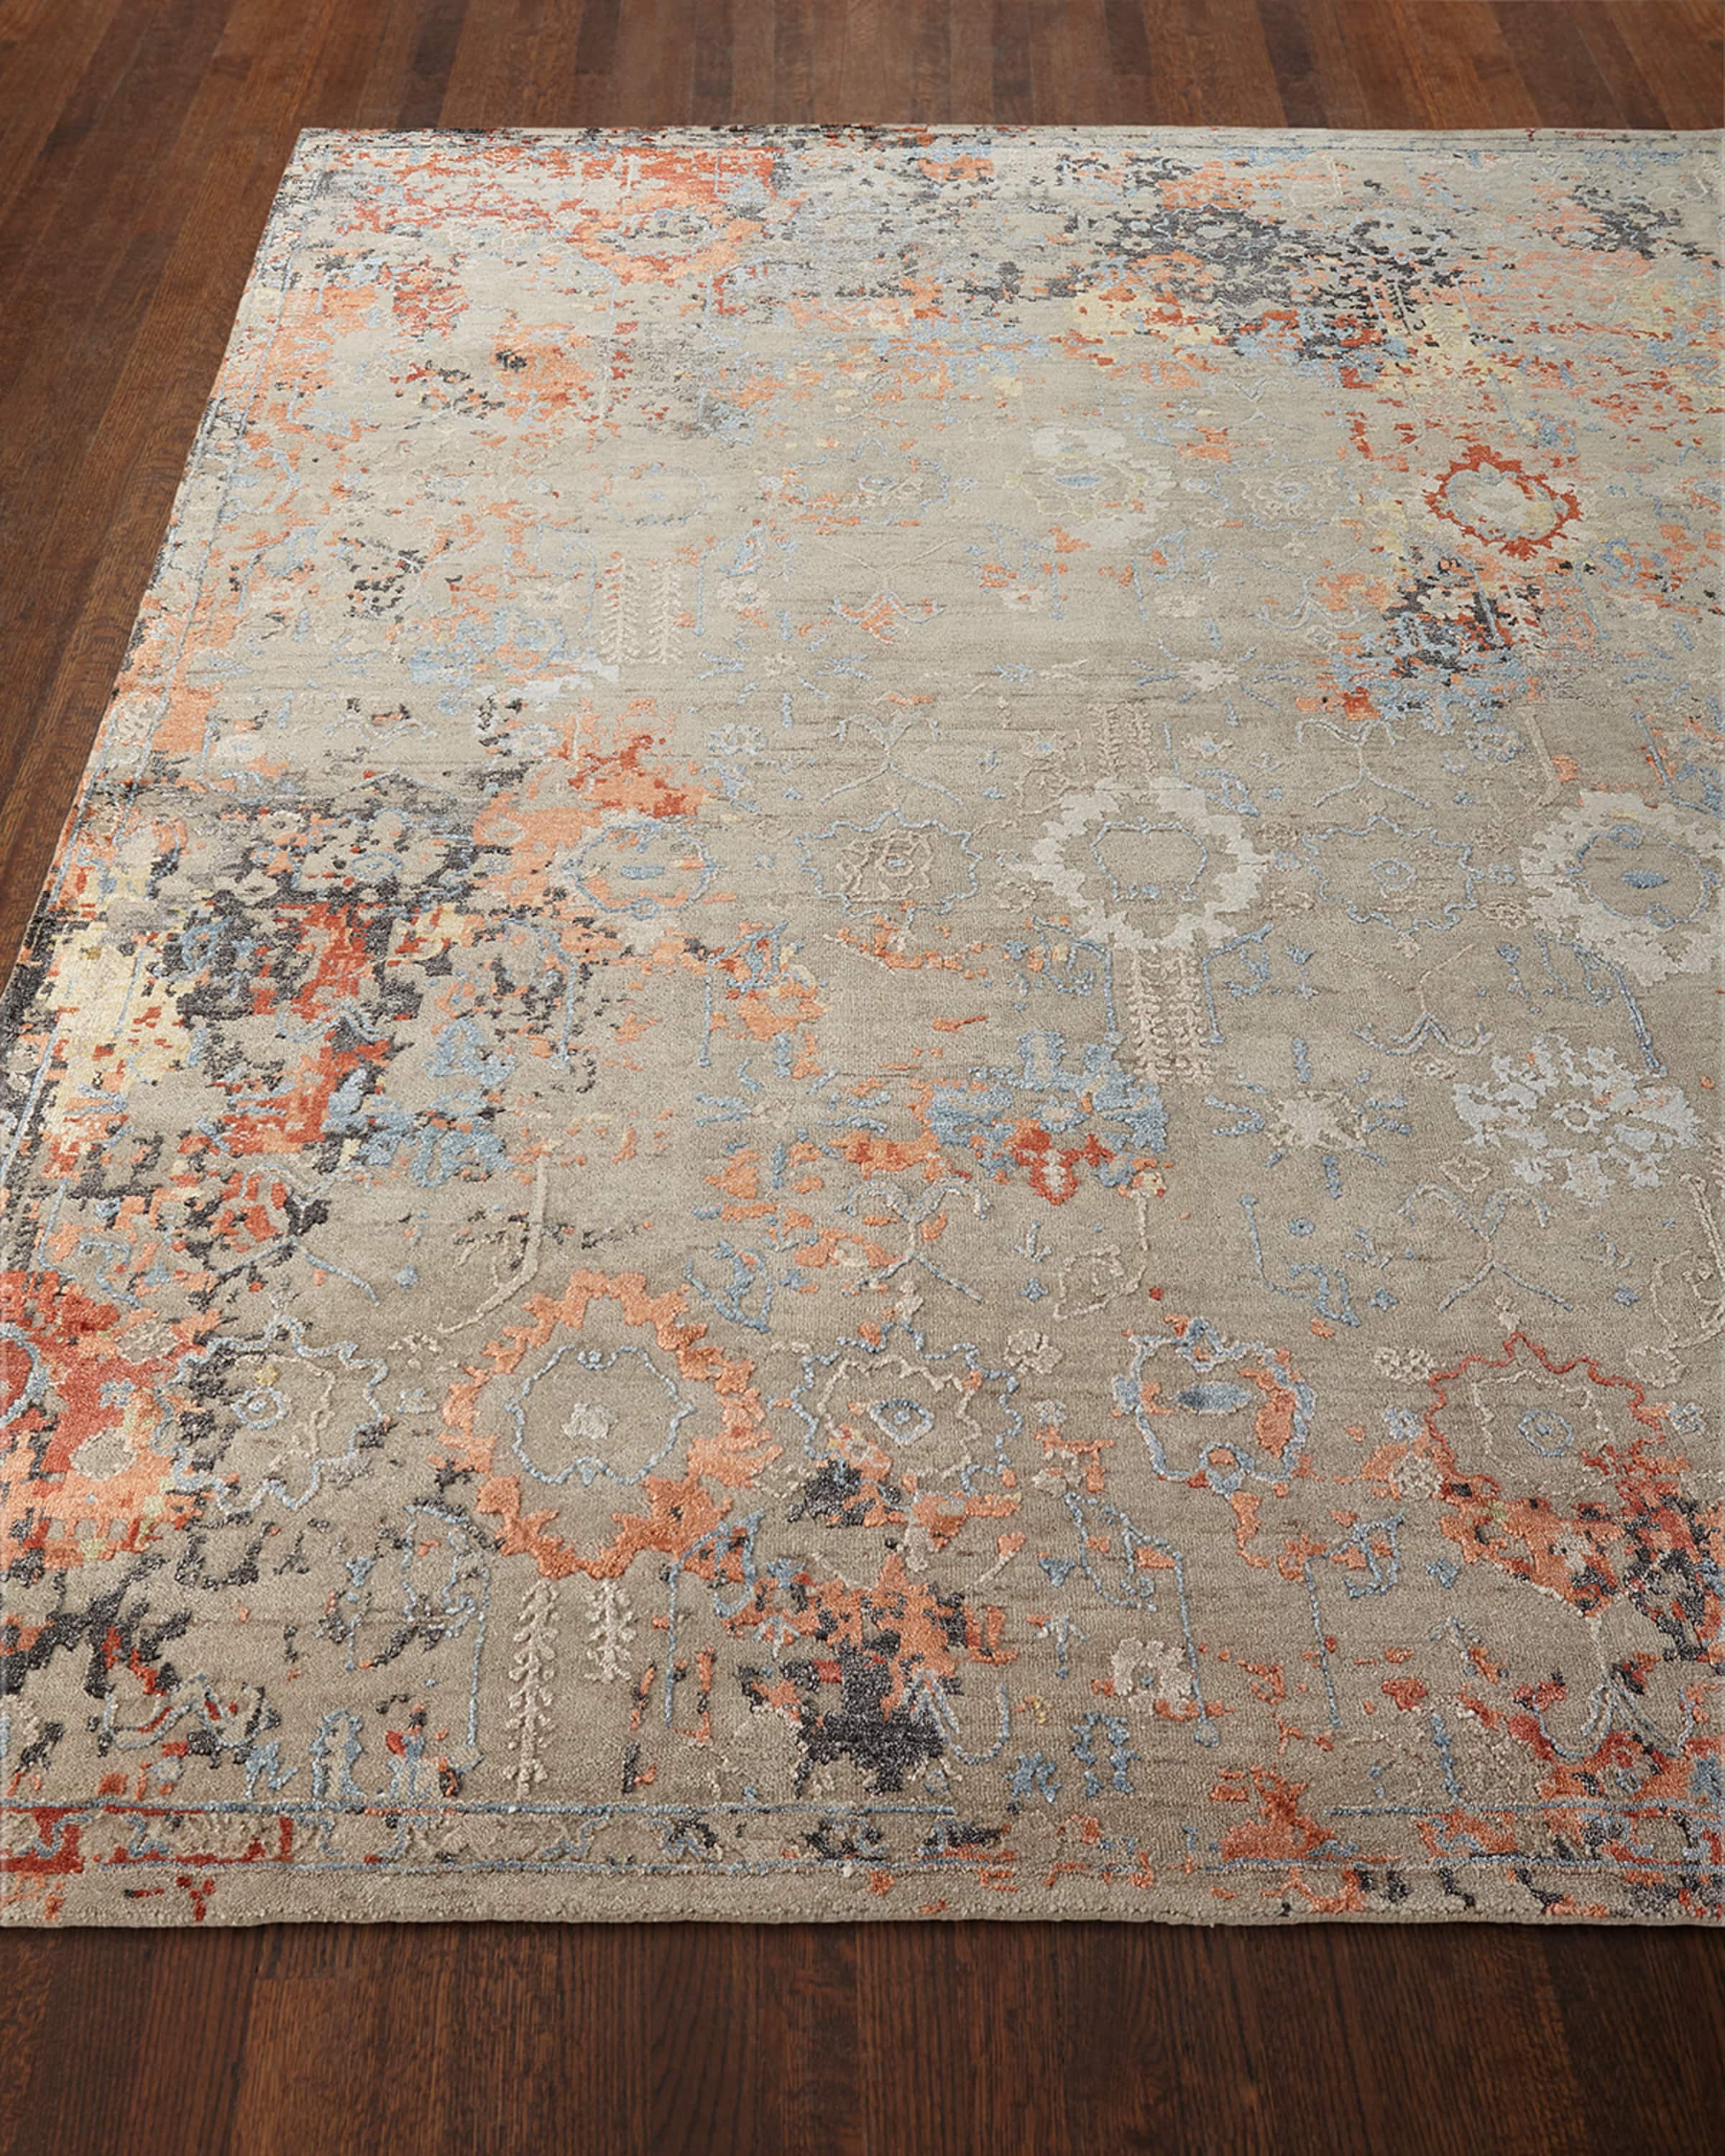 Jenzyn Hand-Knotted Rug, 9' x 12'